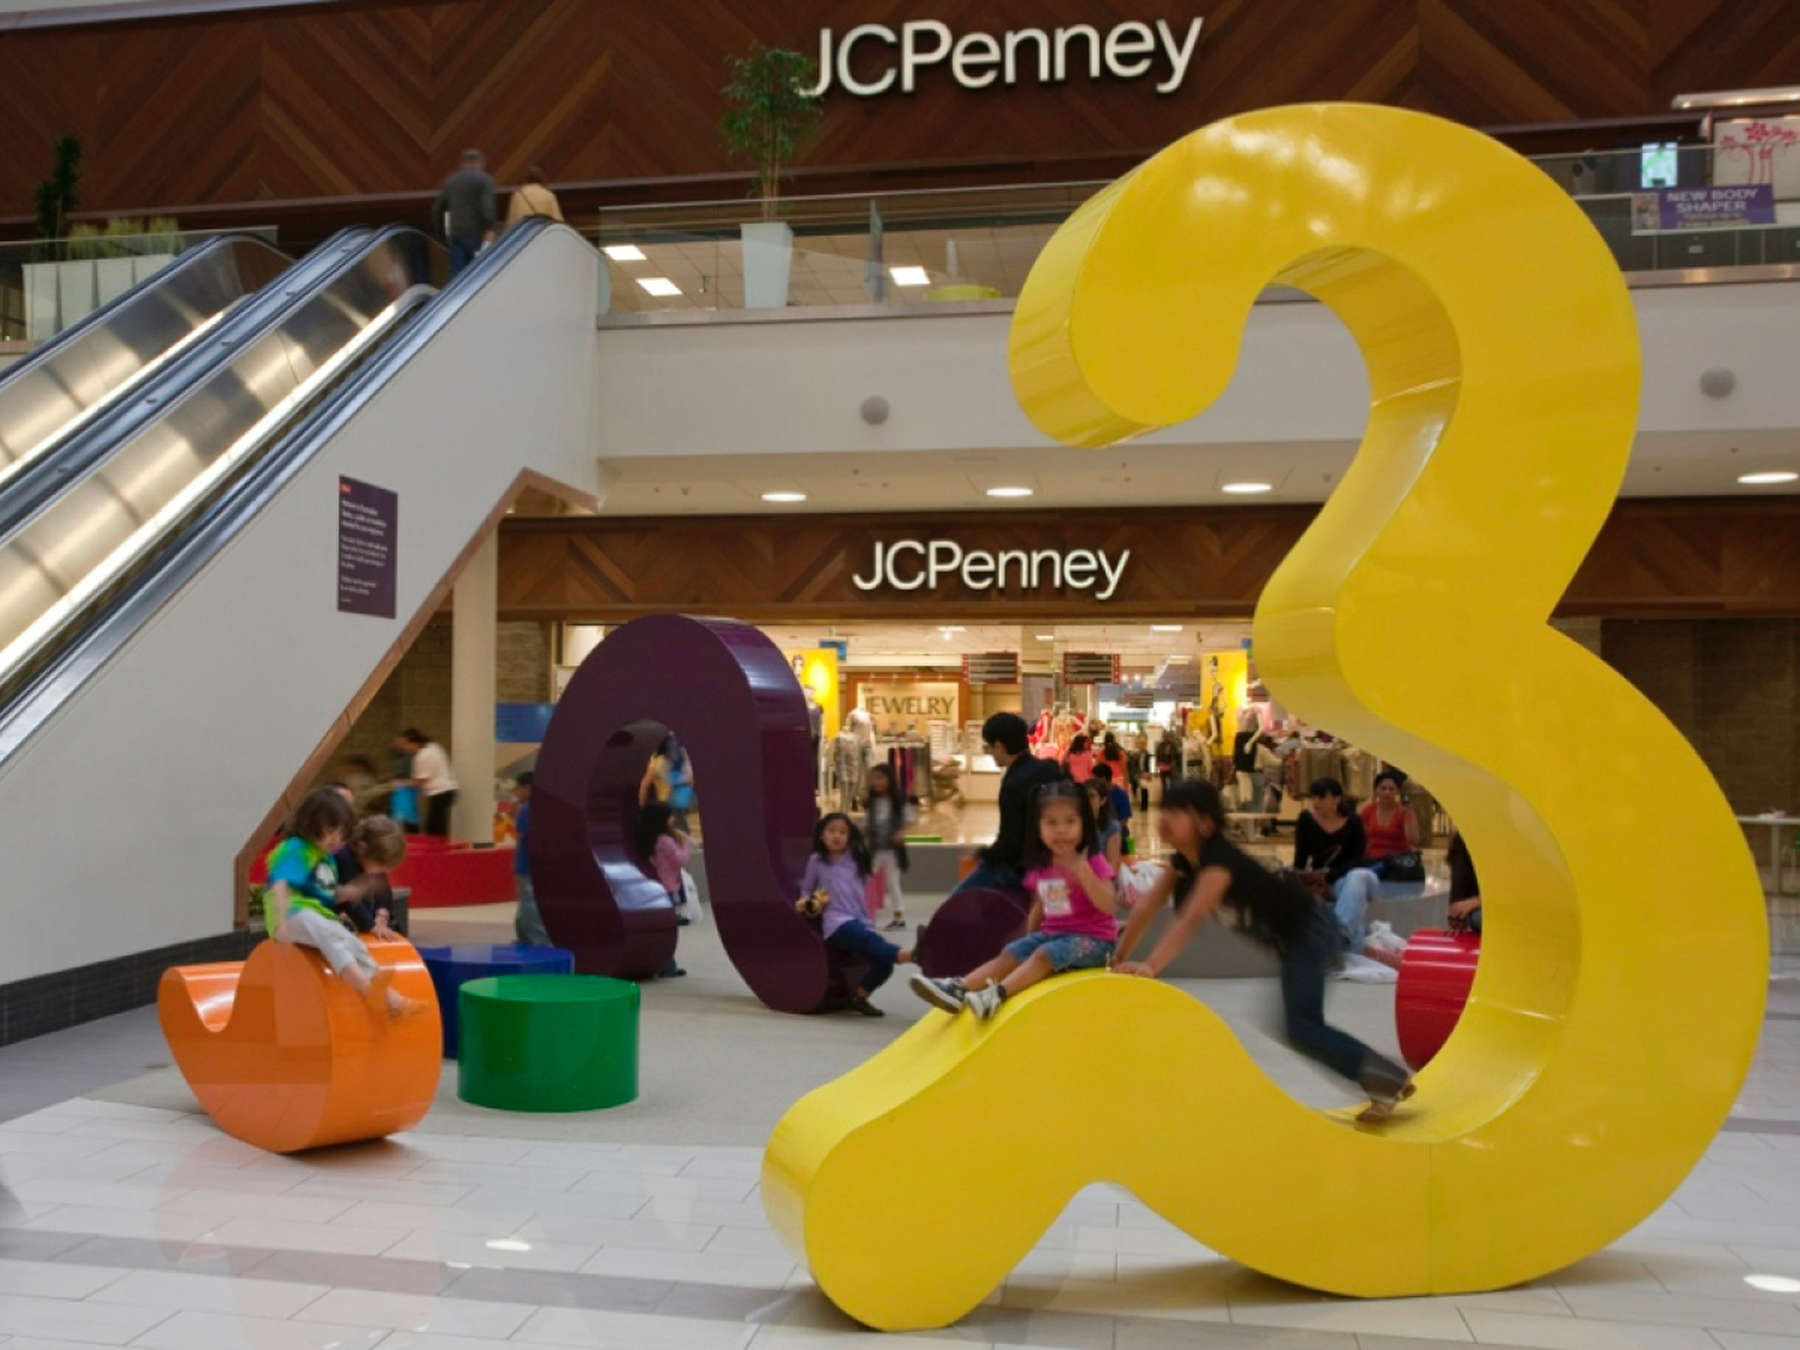 Jeff Koop's imaginative Punctuation Station playscape for Westfield Culver City was an instant hit.